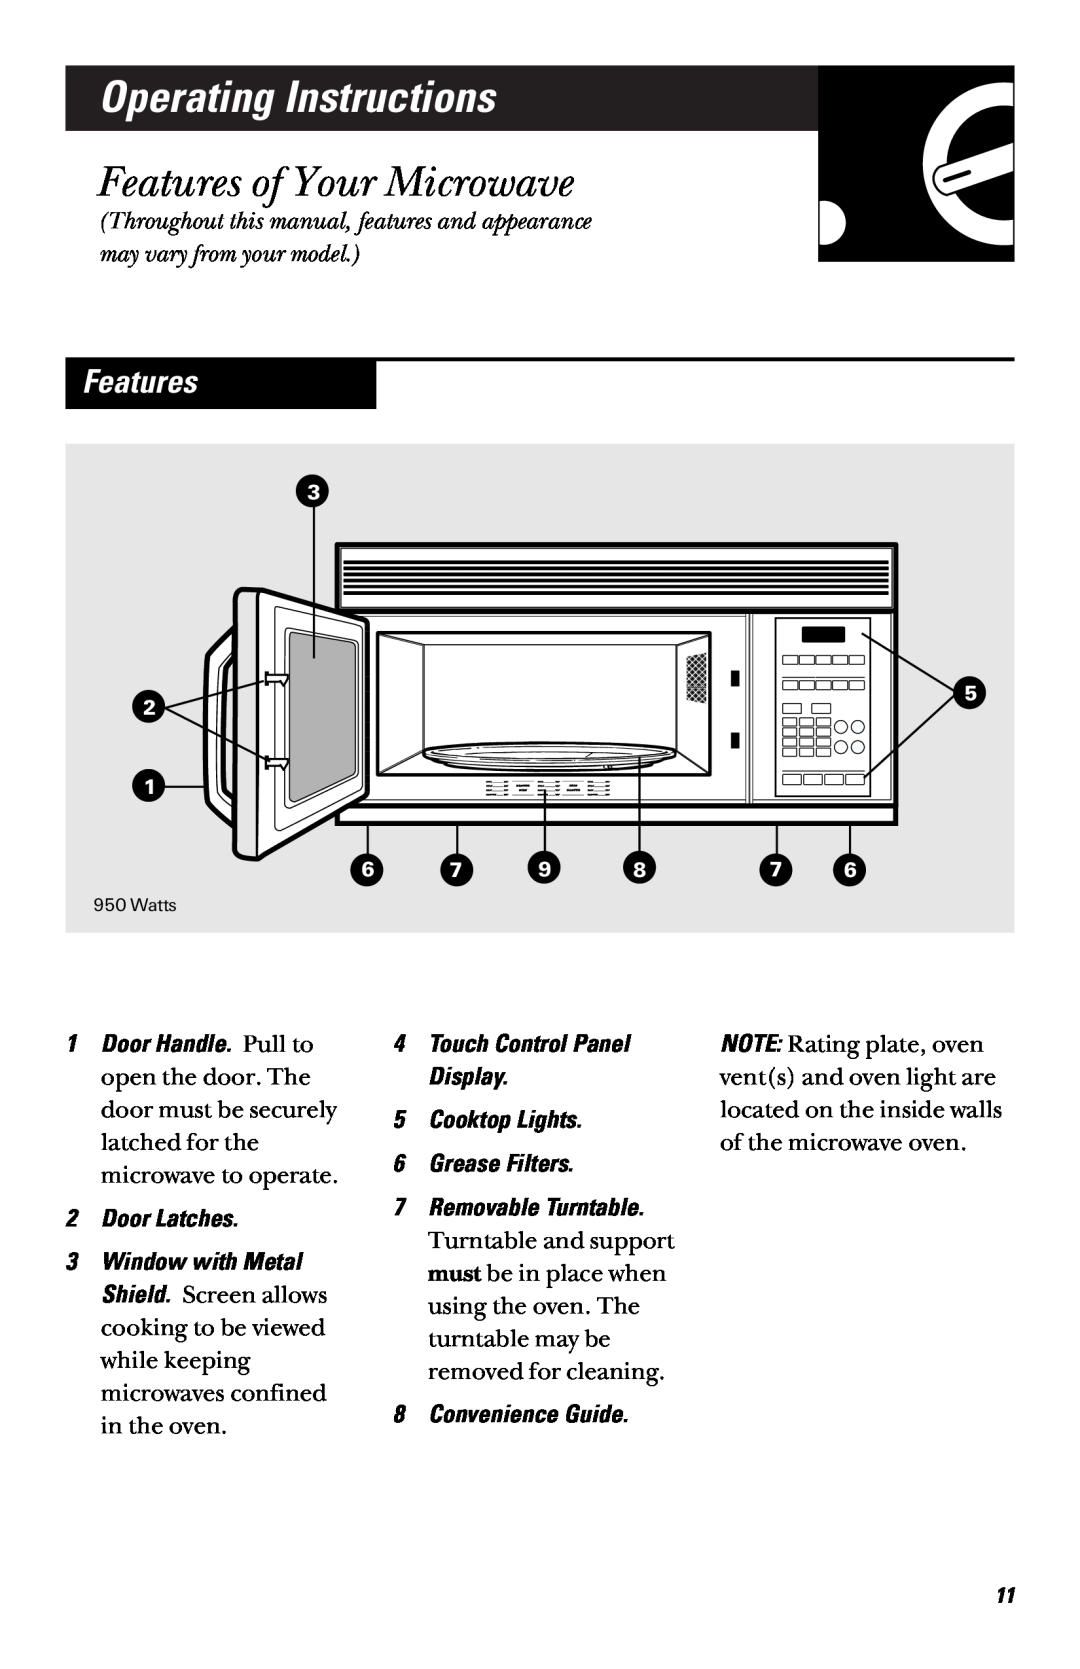 GE JVM1450 2 Operating Instructions, Features of Your Microwave, 2Door Latches, 6Grease Filters 7Removable Turntable 